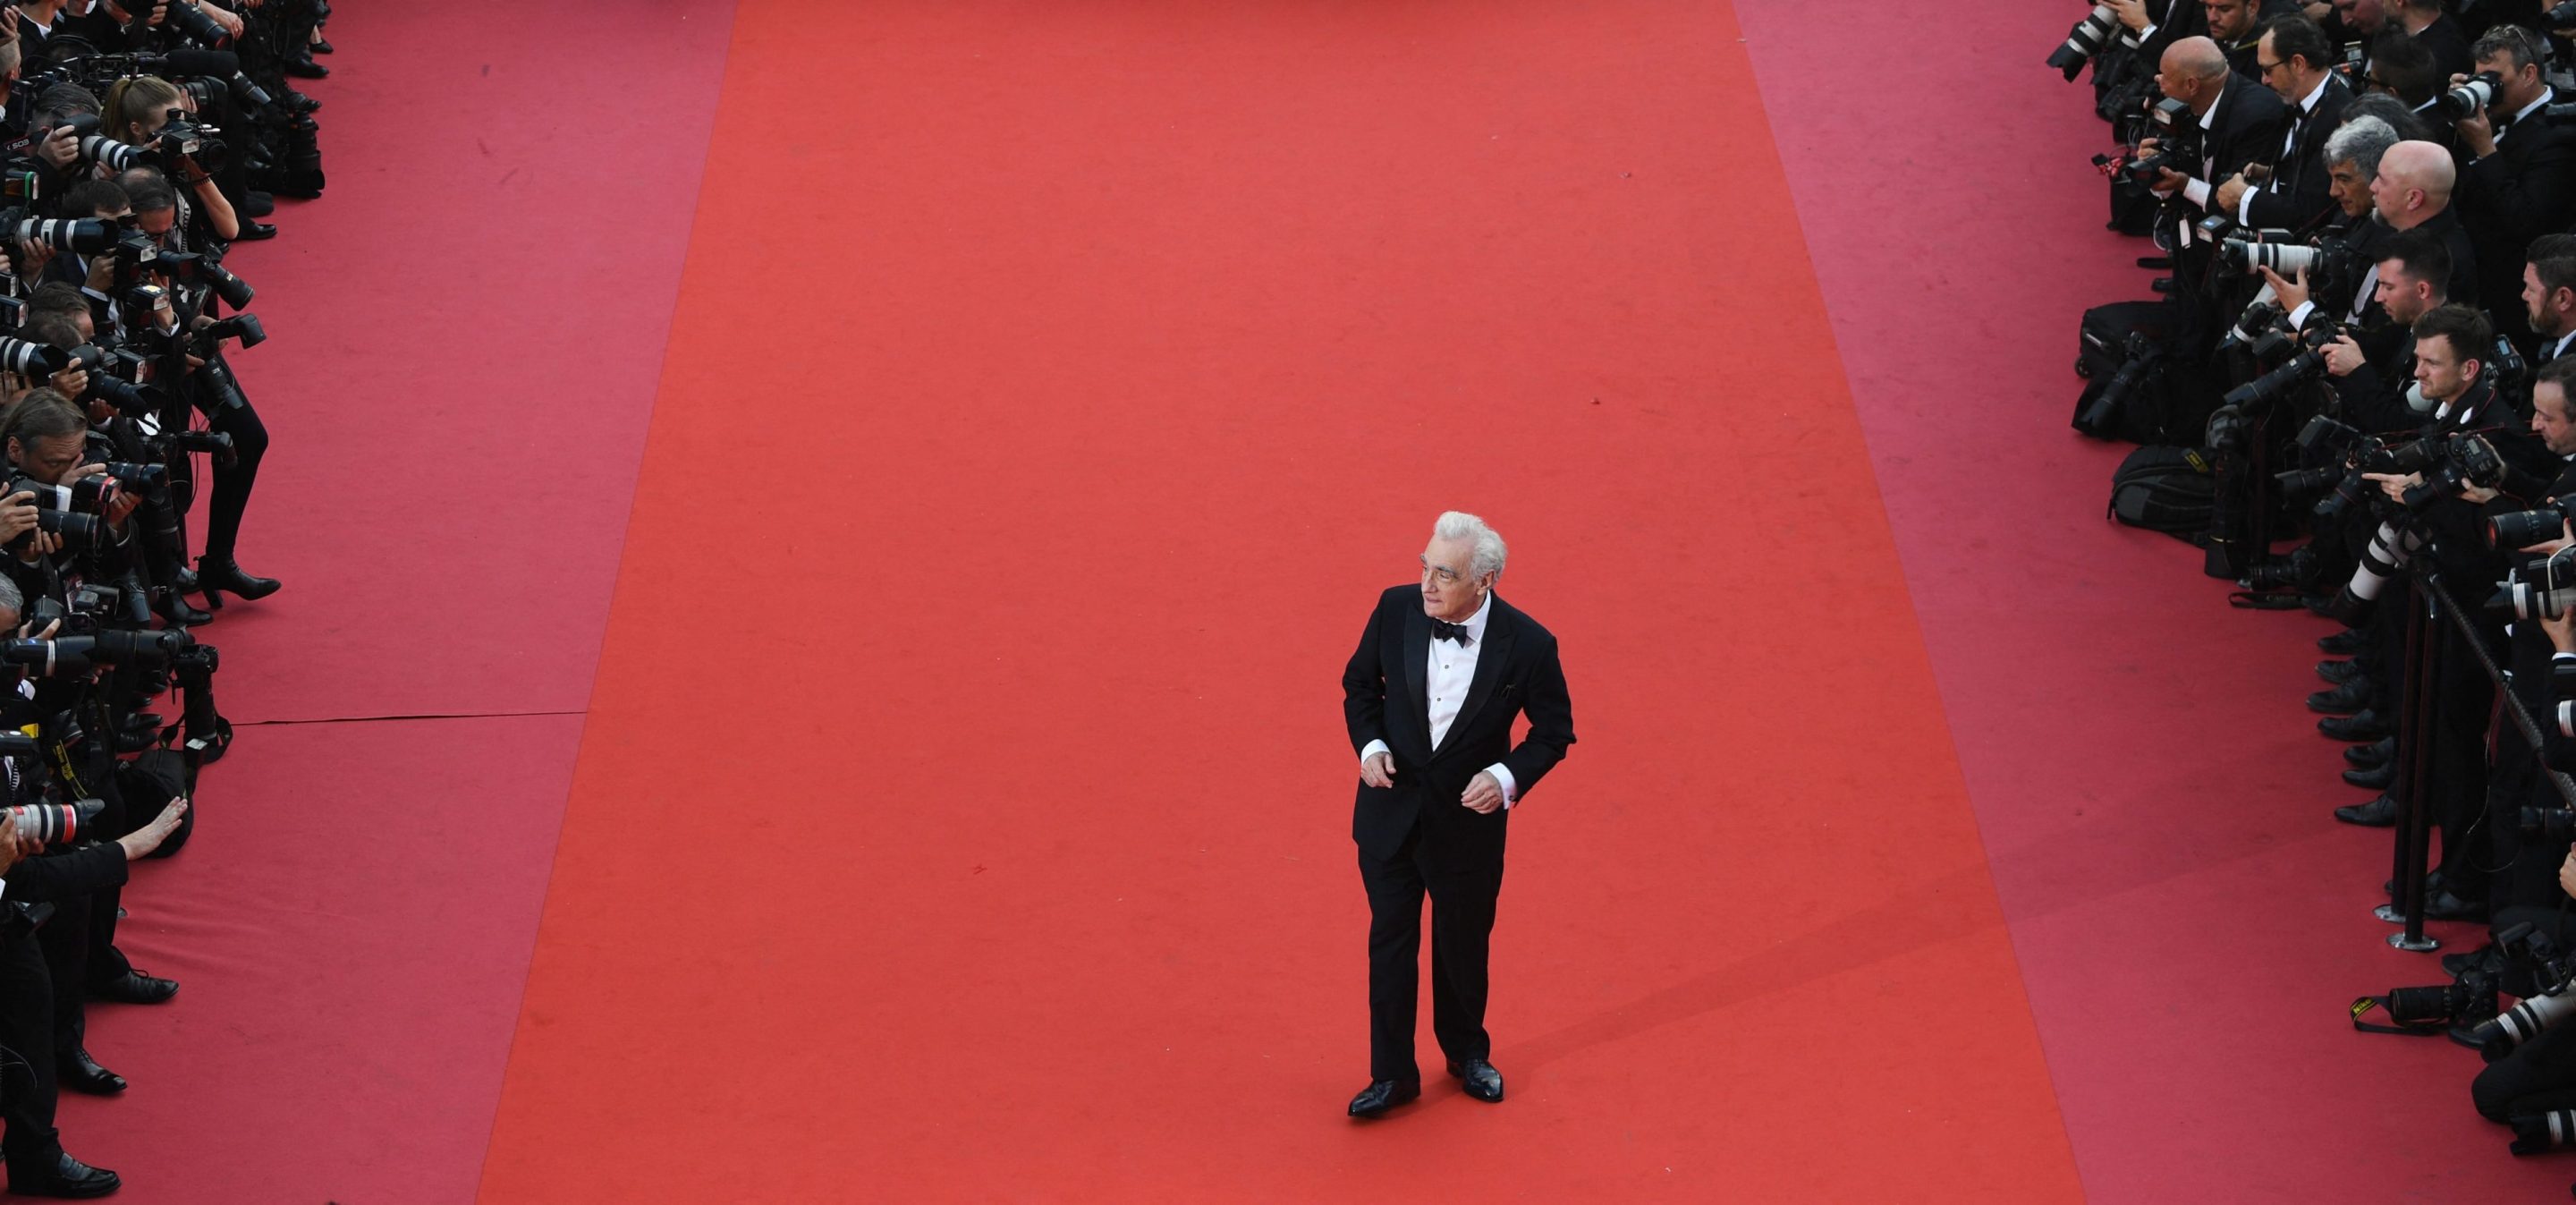 TOPSHOT - US director Martin Scorsese poses as he arrives on May 8, 2018 for the screening of the film "Todos Lo Saben (Everybody Knows)" and the opening ceremony of the 71st edition of the Cannes Film Festival in Cannes, southern France. (Photo by Antonin THUILLIER / AFP) (Photo by ANTONIN THUILLIER/AFP via Getty Images)